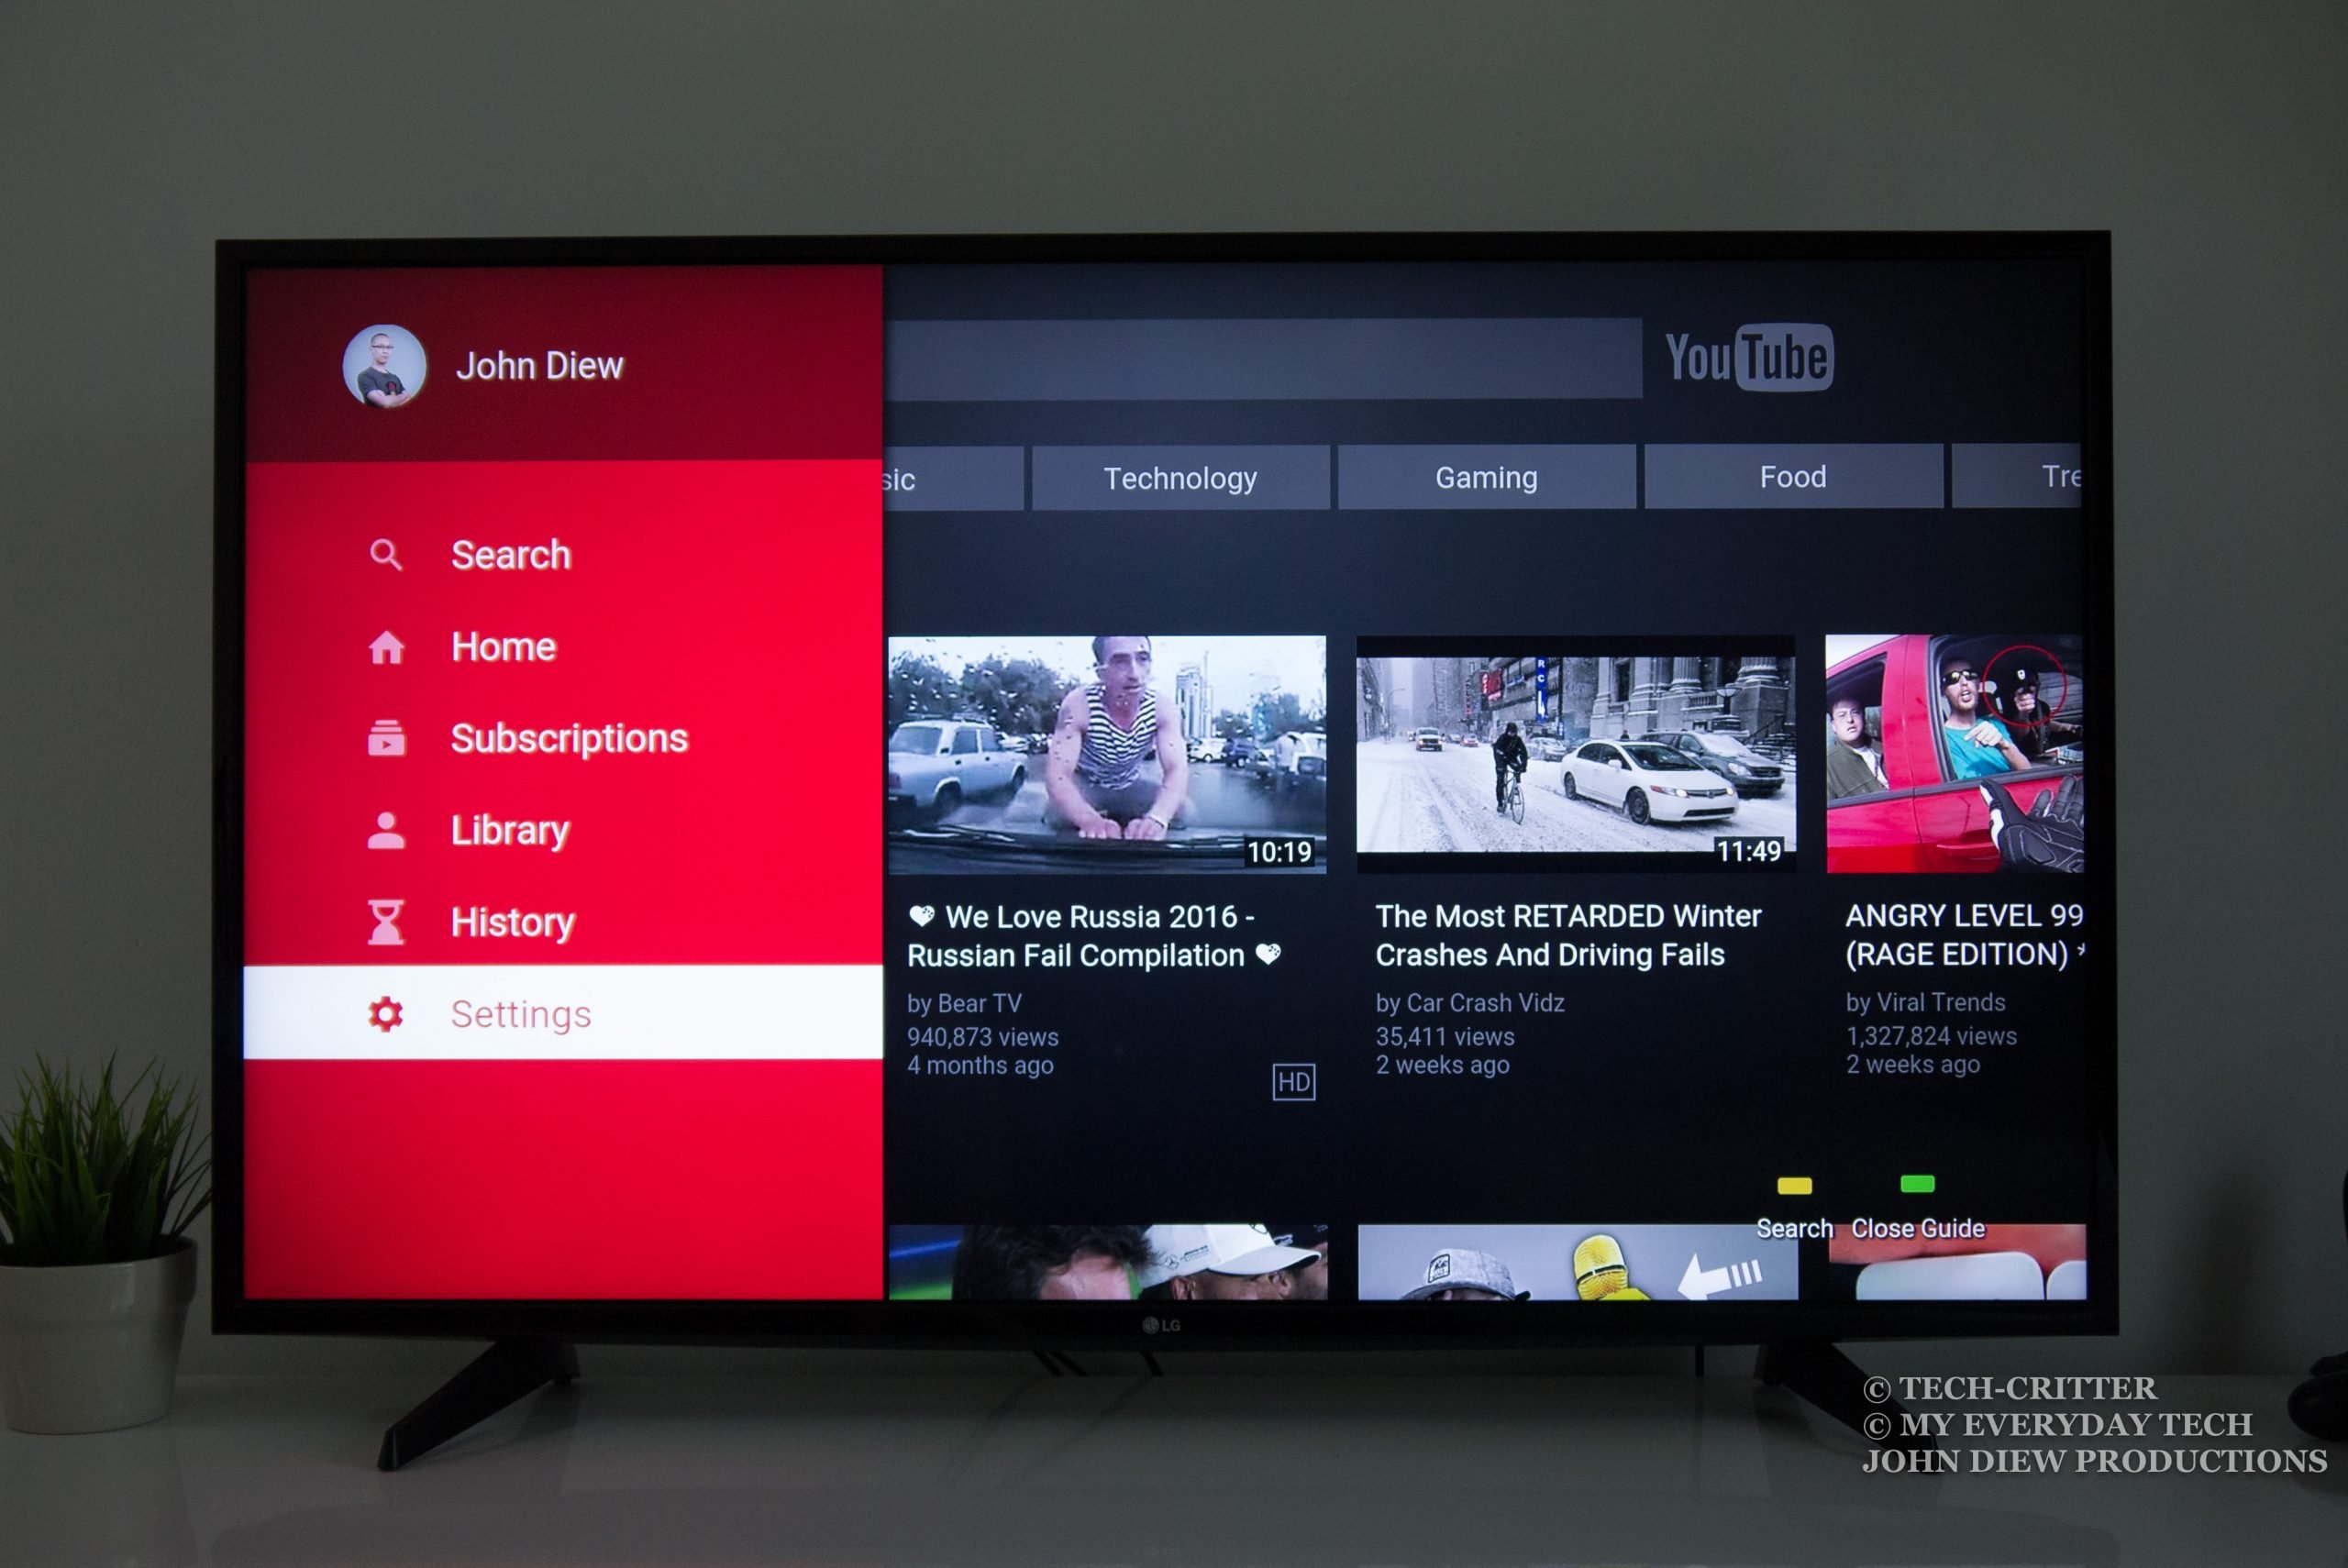 How to Cast YouTube to Smart TV